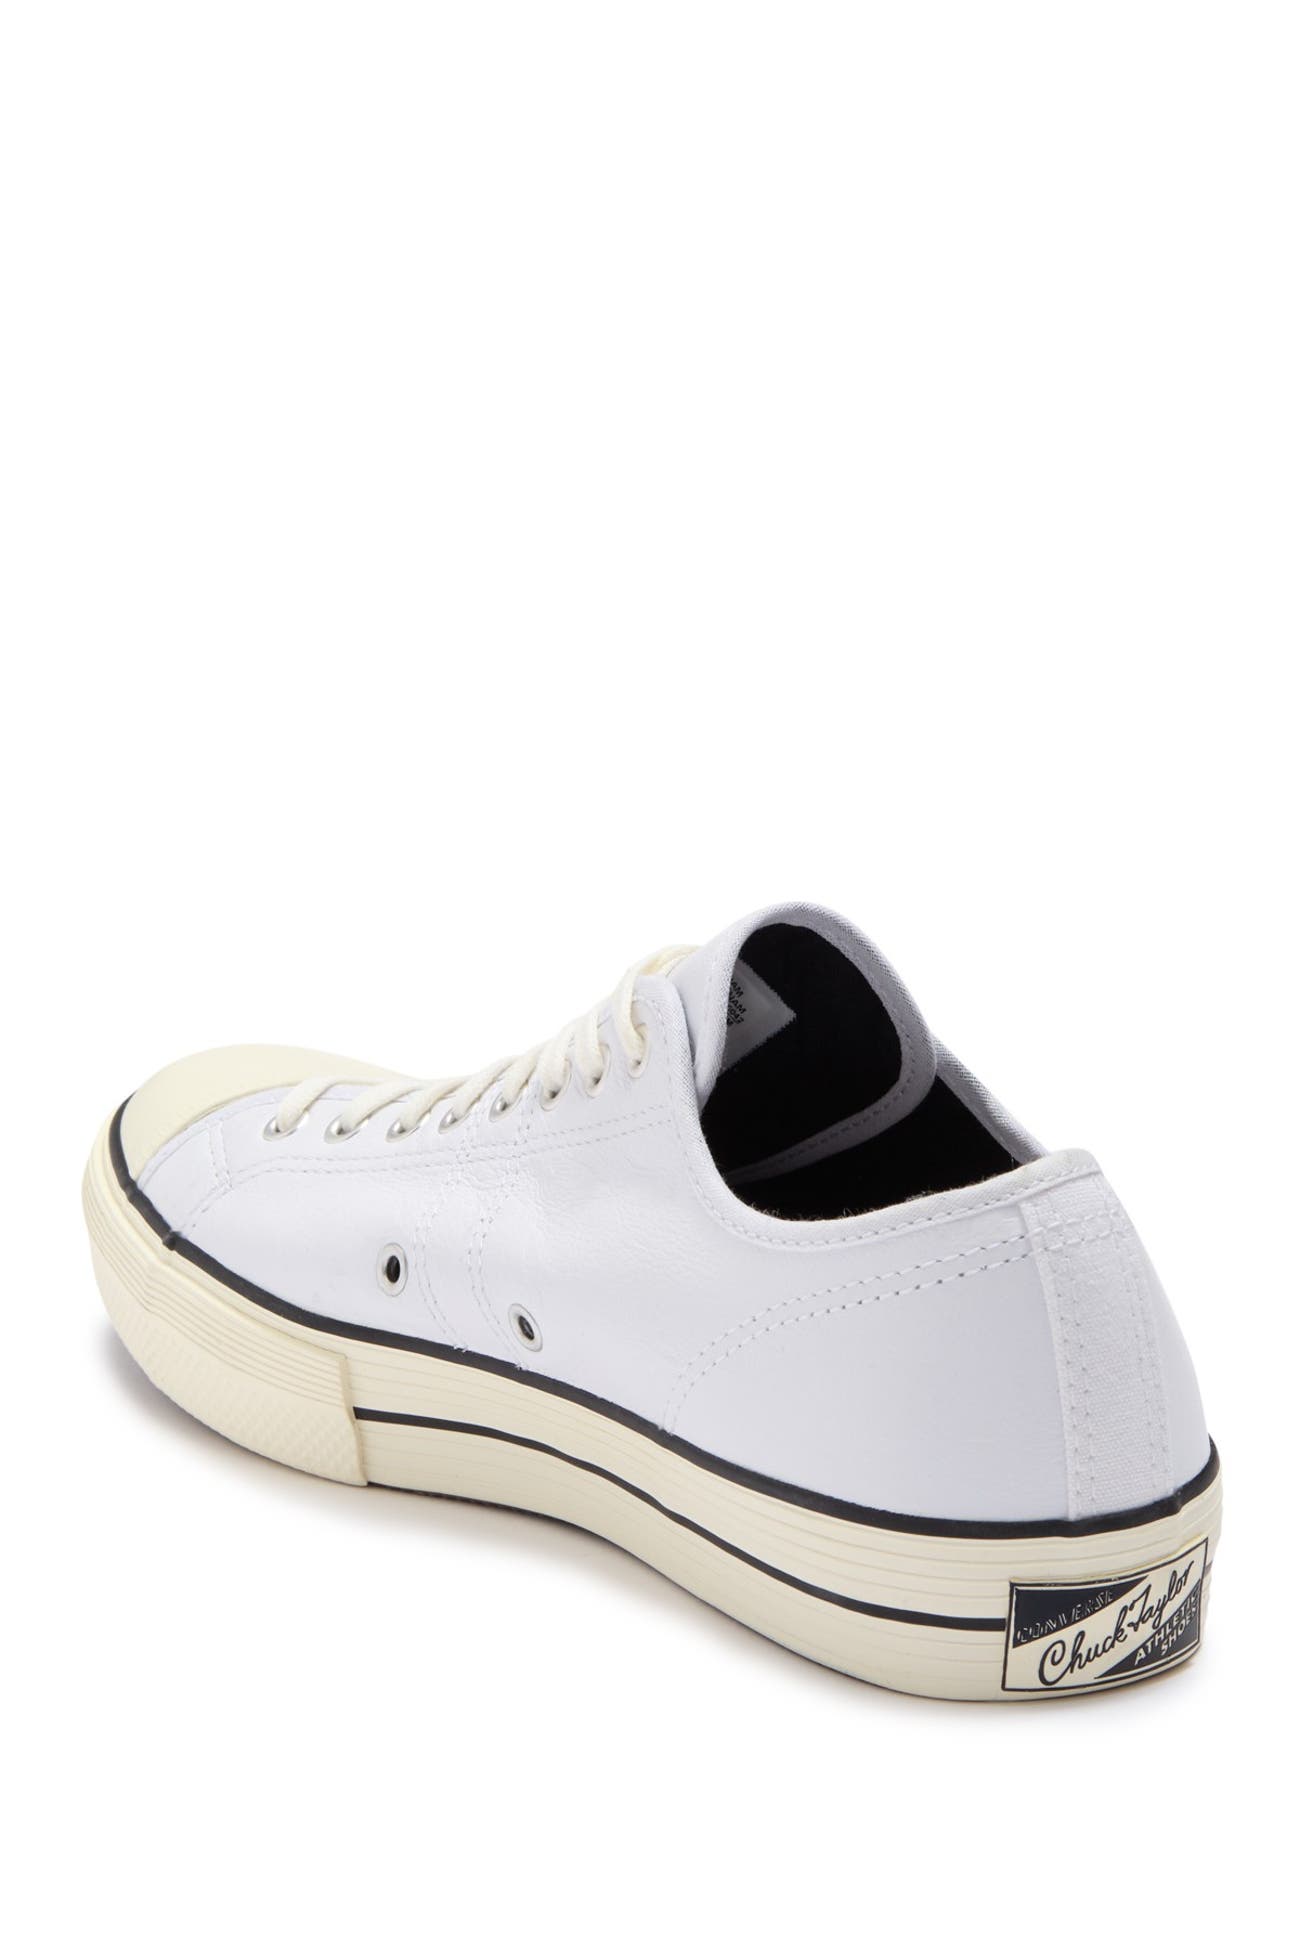 Converse | Lucky Star Leather Oxford Sneaker | Nordstrom Rack